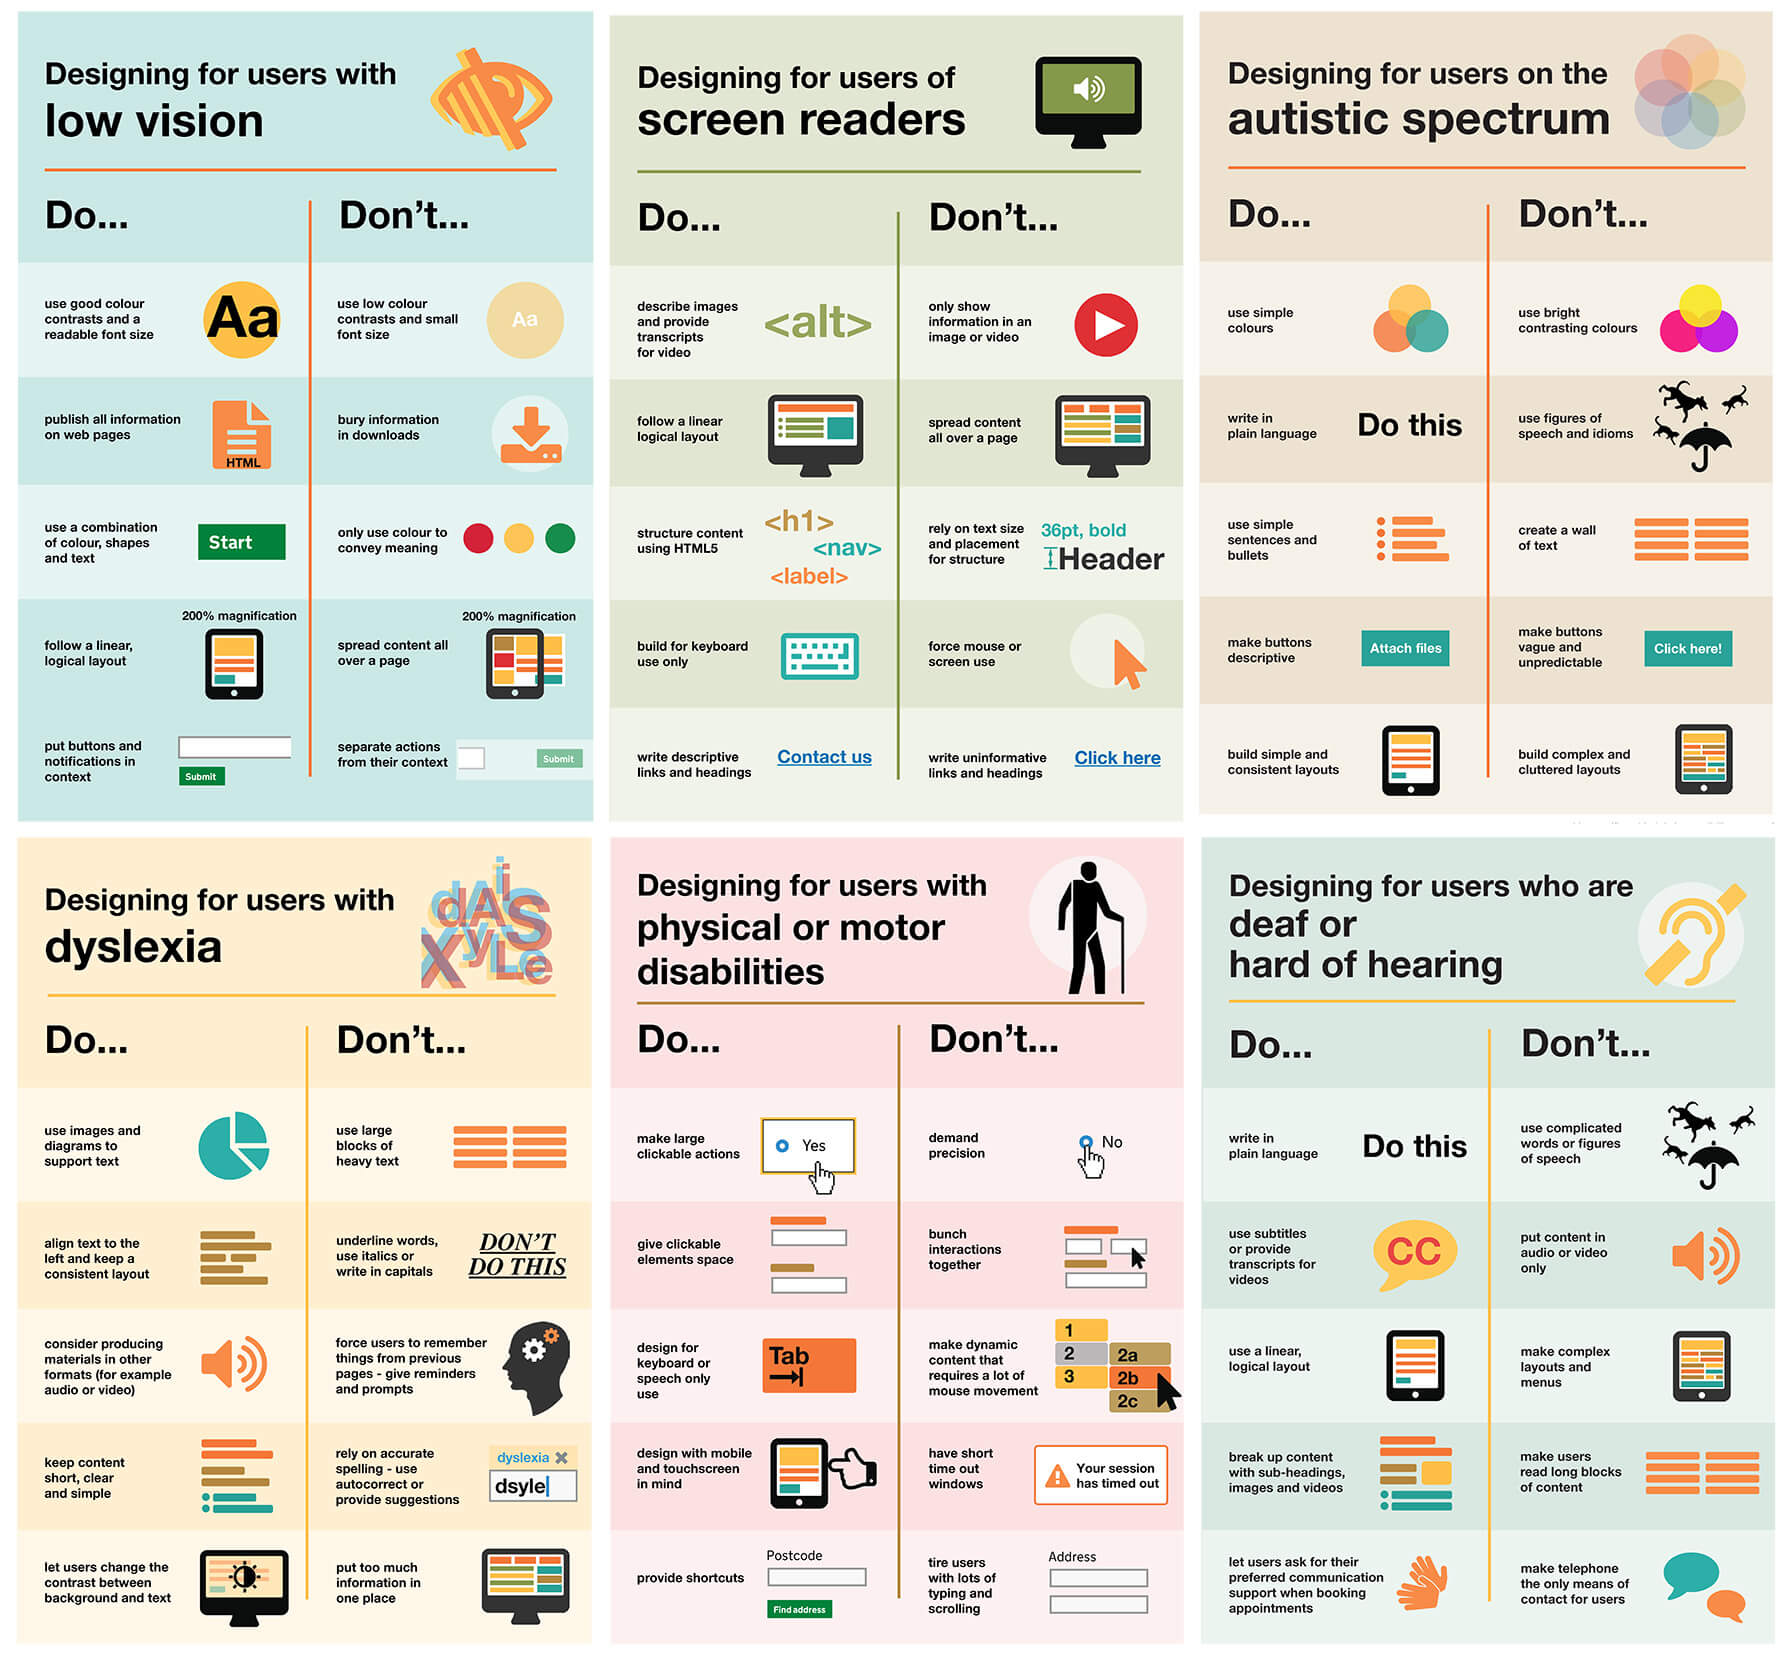 Digital posters showing accessibility dos and don'ts.